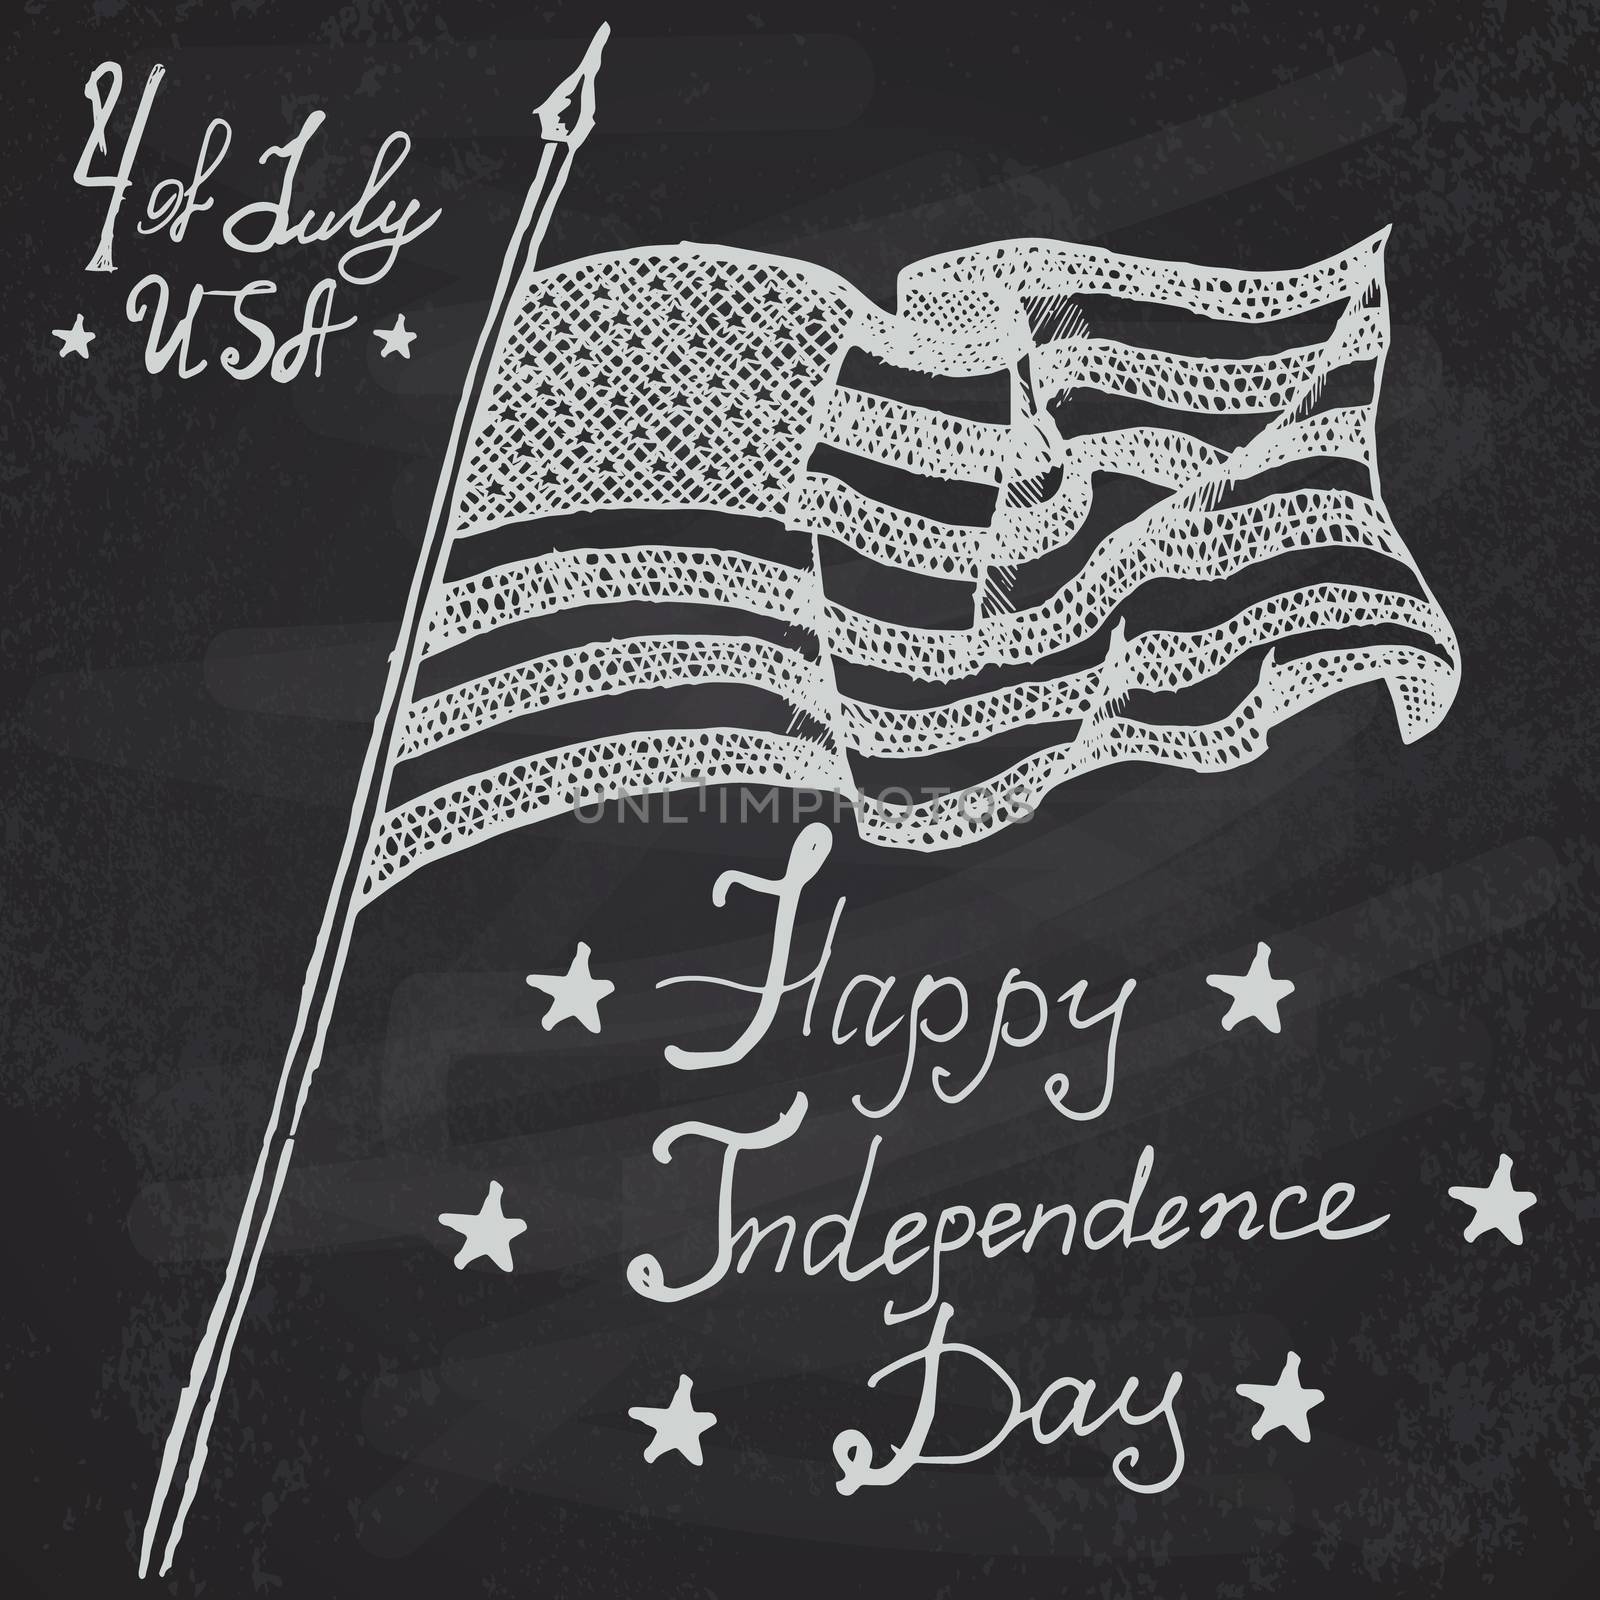 Usa waving flag, American symbol, forth of july, Hand drawn sketch, text happy independence day, vector illustration, on chalkboard background by Lemon_workshop